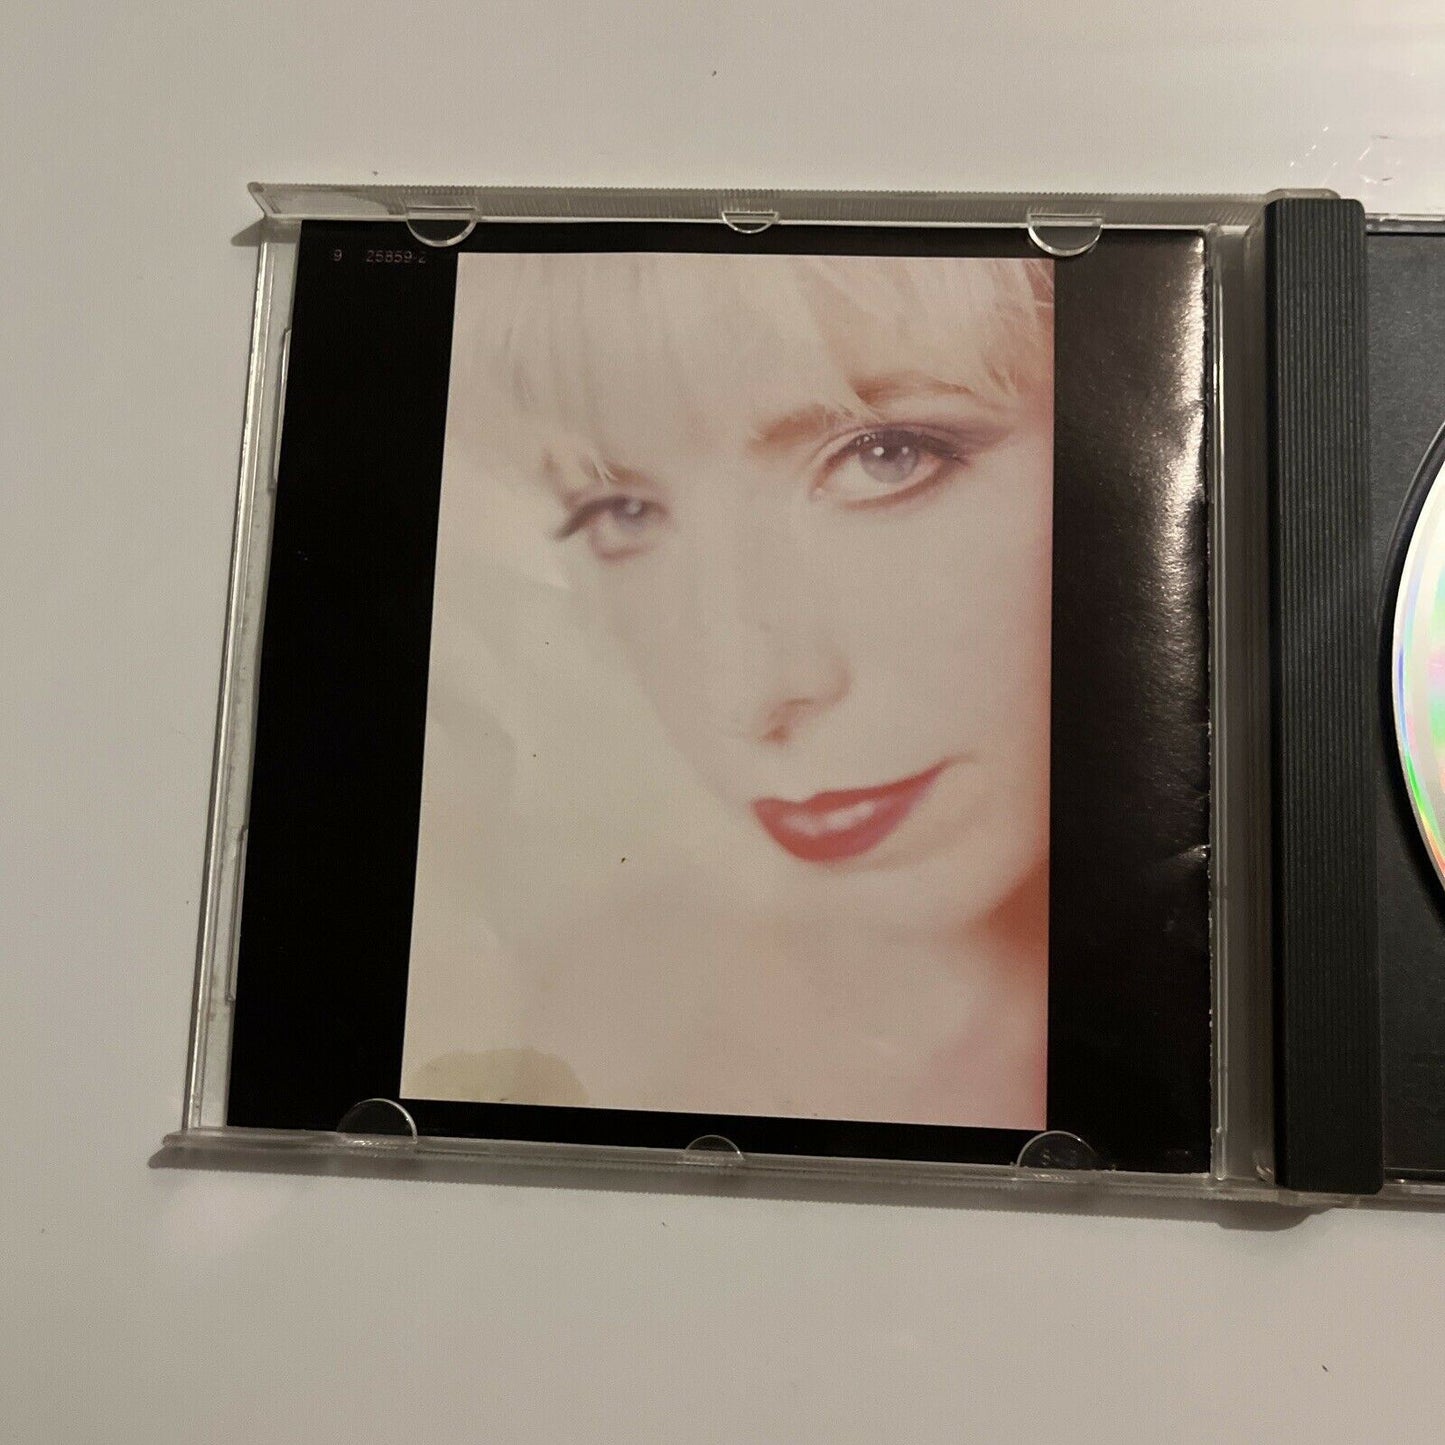 Floating into the Night by Julee Cruise (CD, 1989) – Retro Unit